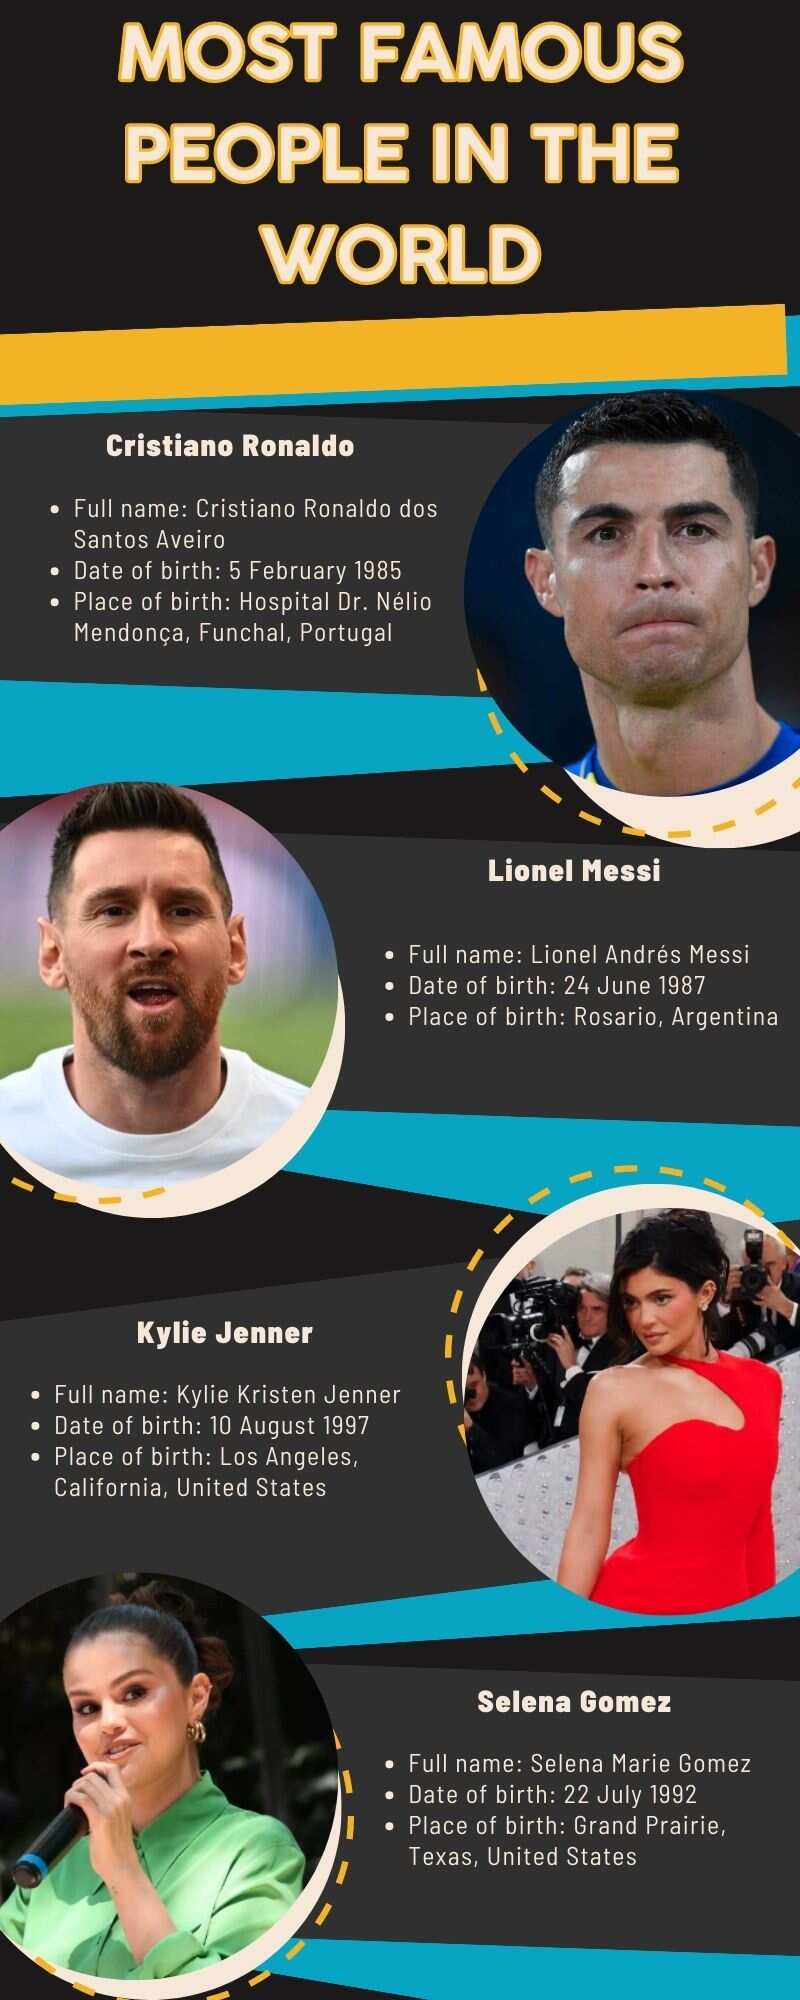 Most famous people in the world